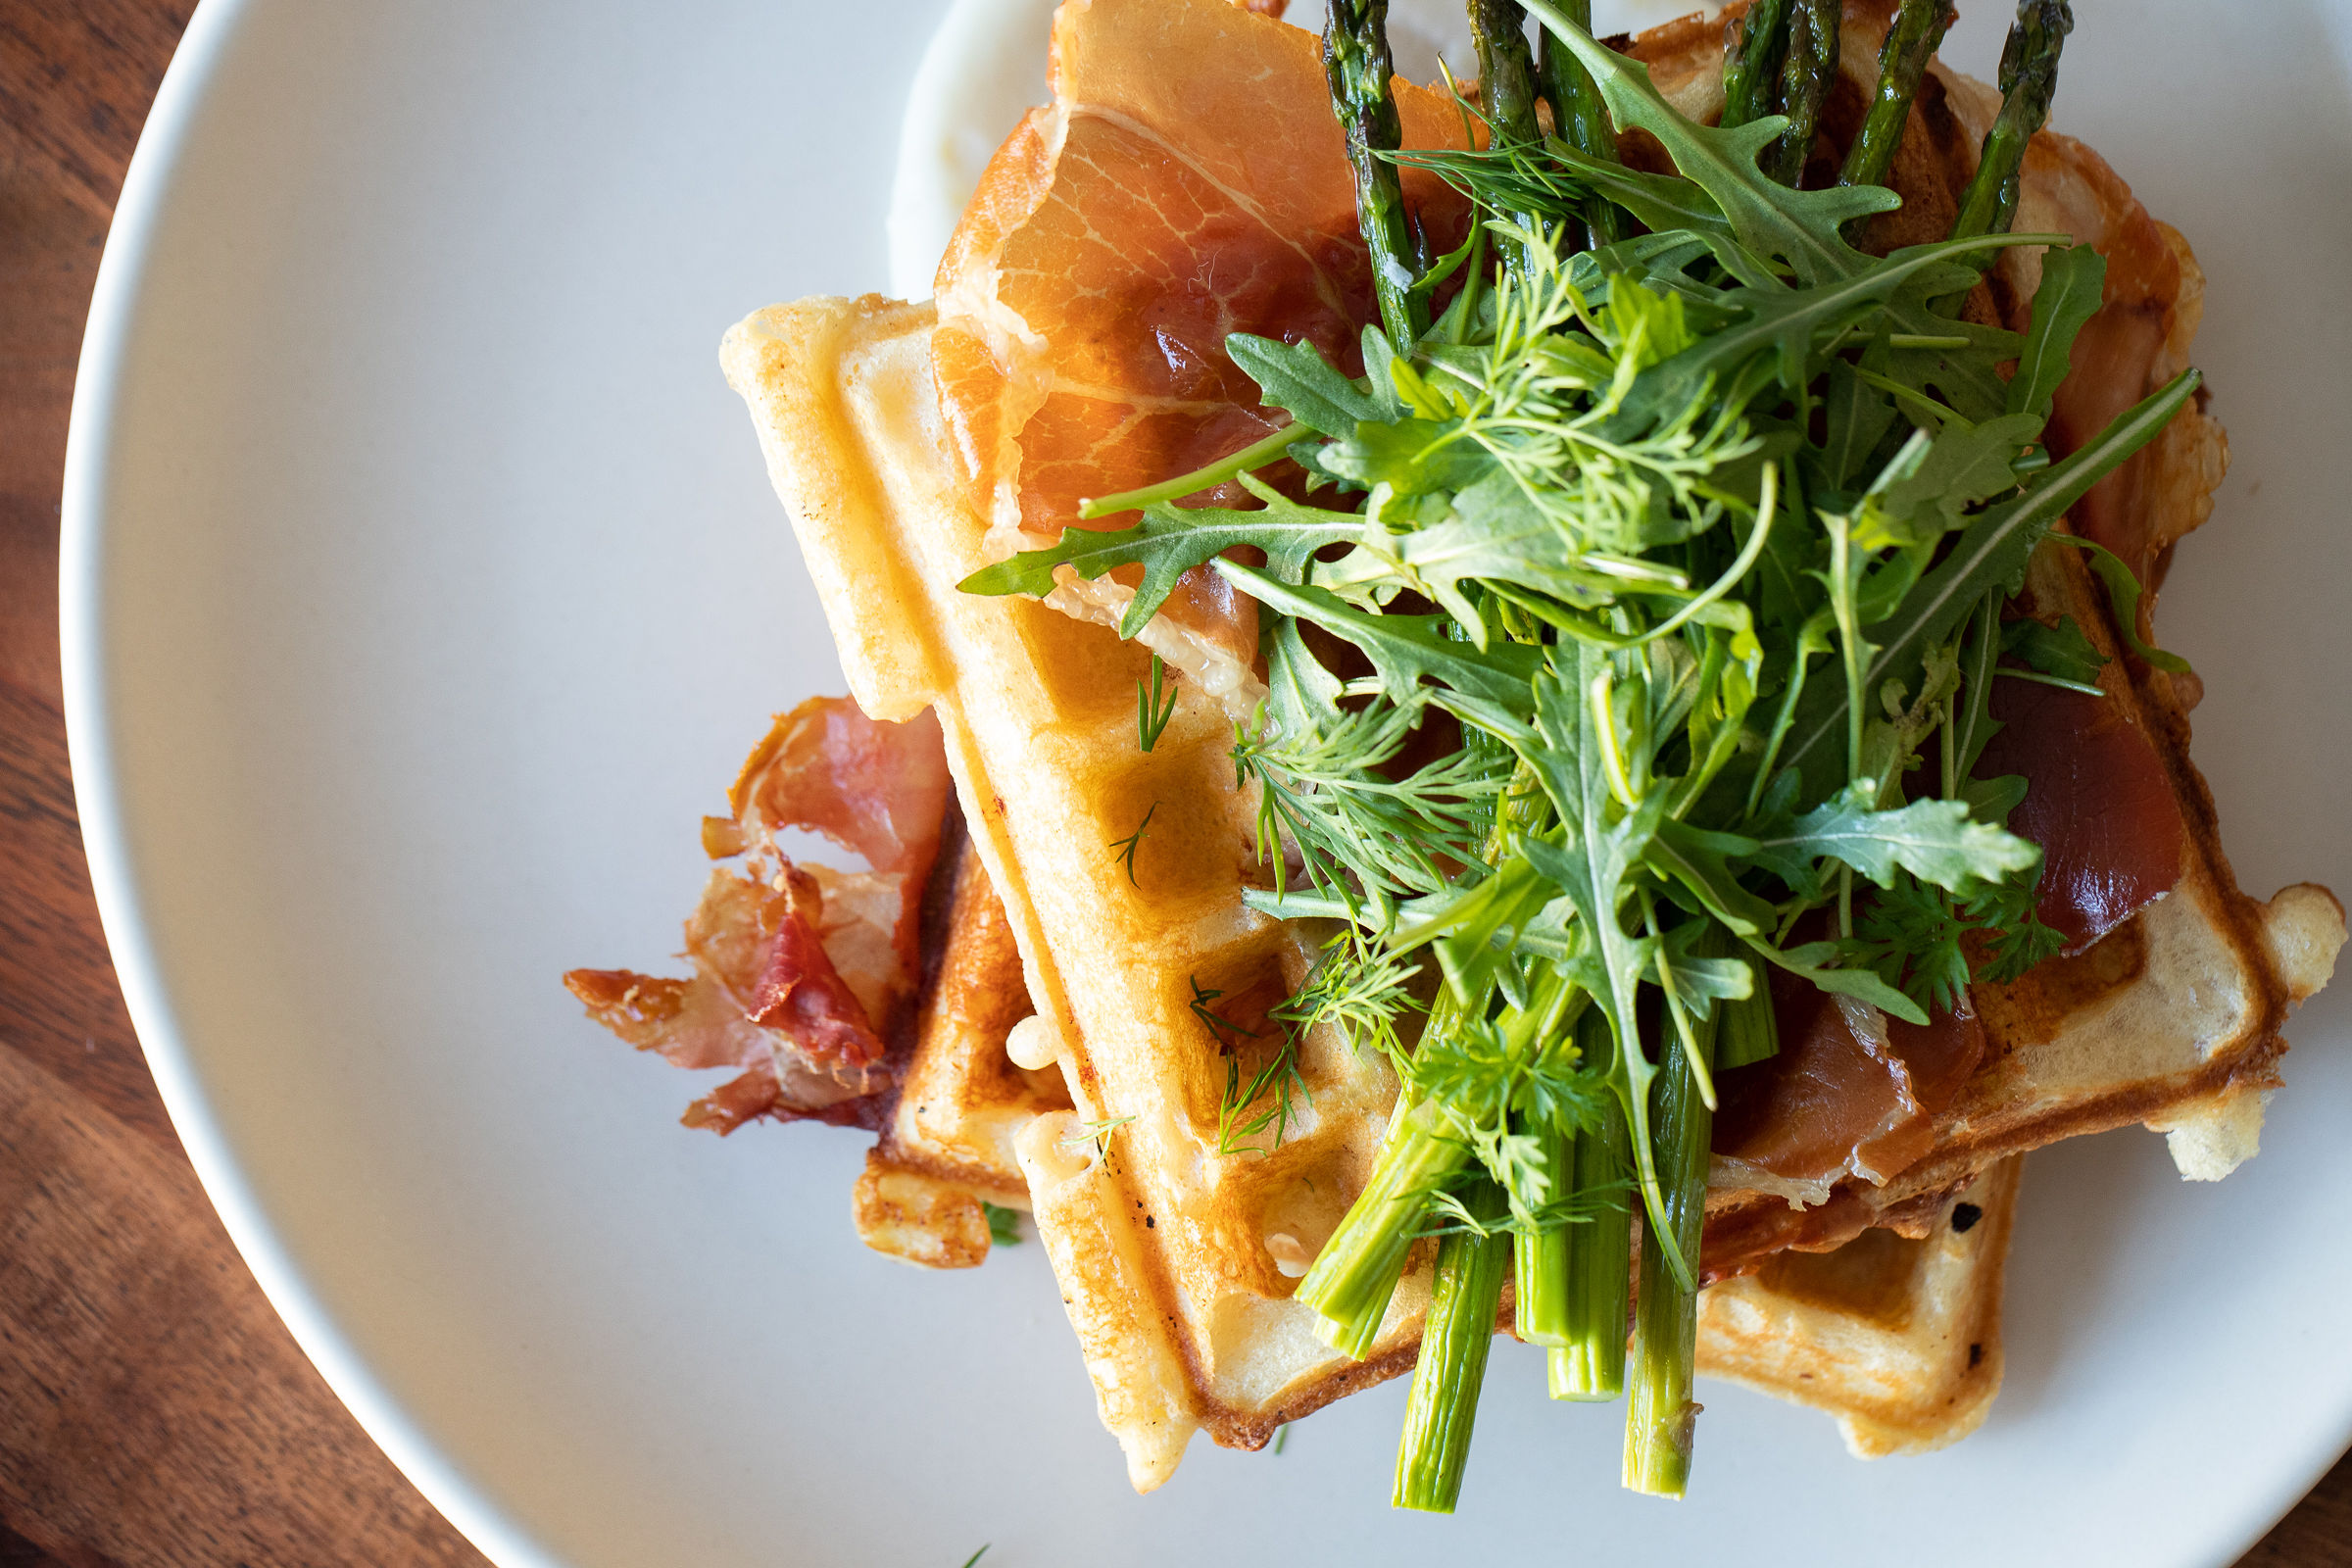 Coming Soon to San Francisco’s Mission: A Spot for Breakfast Salads, Waffles and Aussie Sandwiches